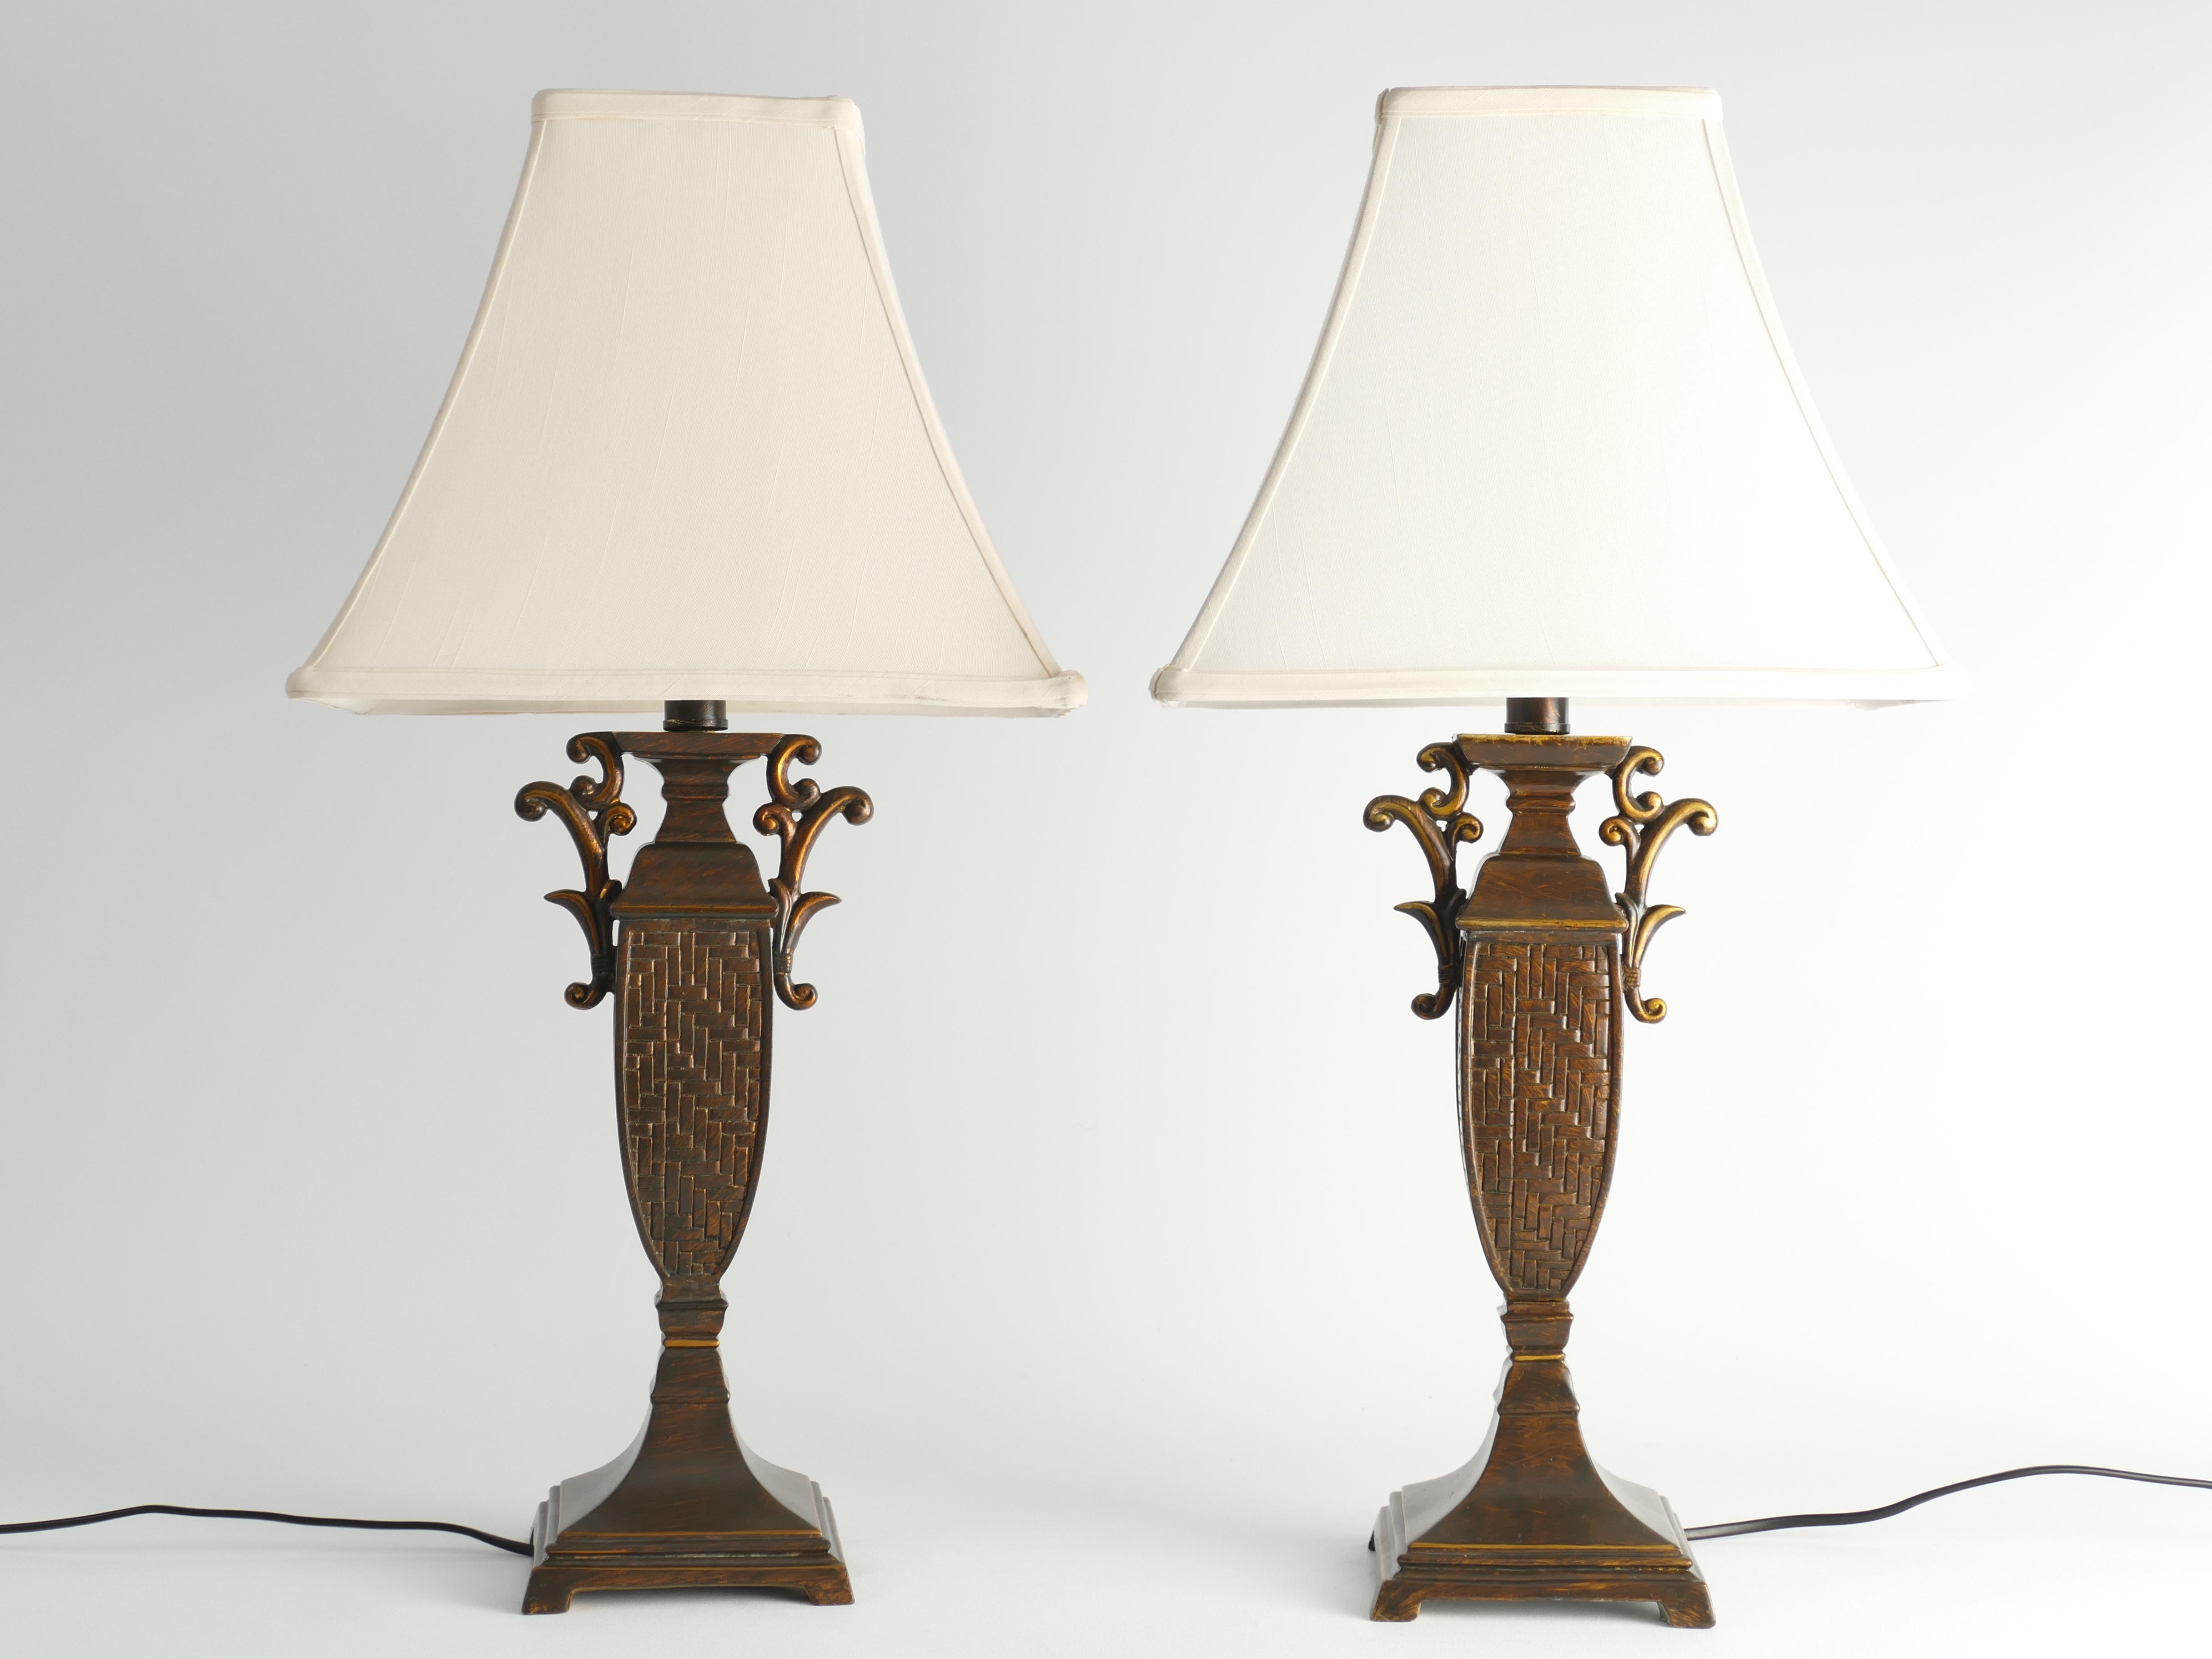 Plaster Chinoiserie Faux Rattan Amphora Table Lamps by Aneta, Sweden 1980's For Sale